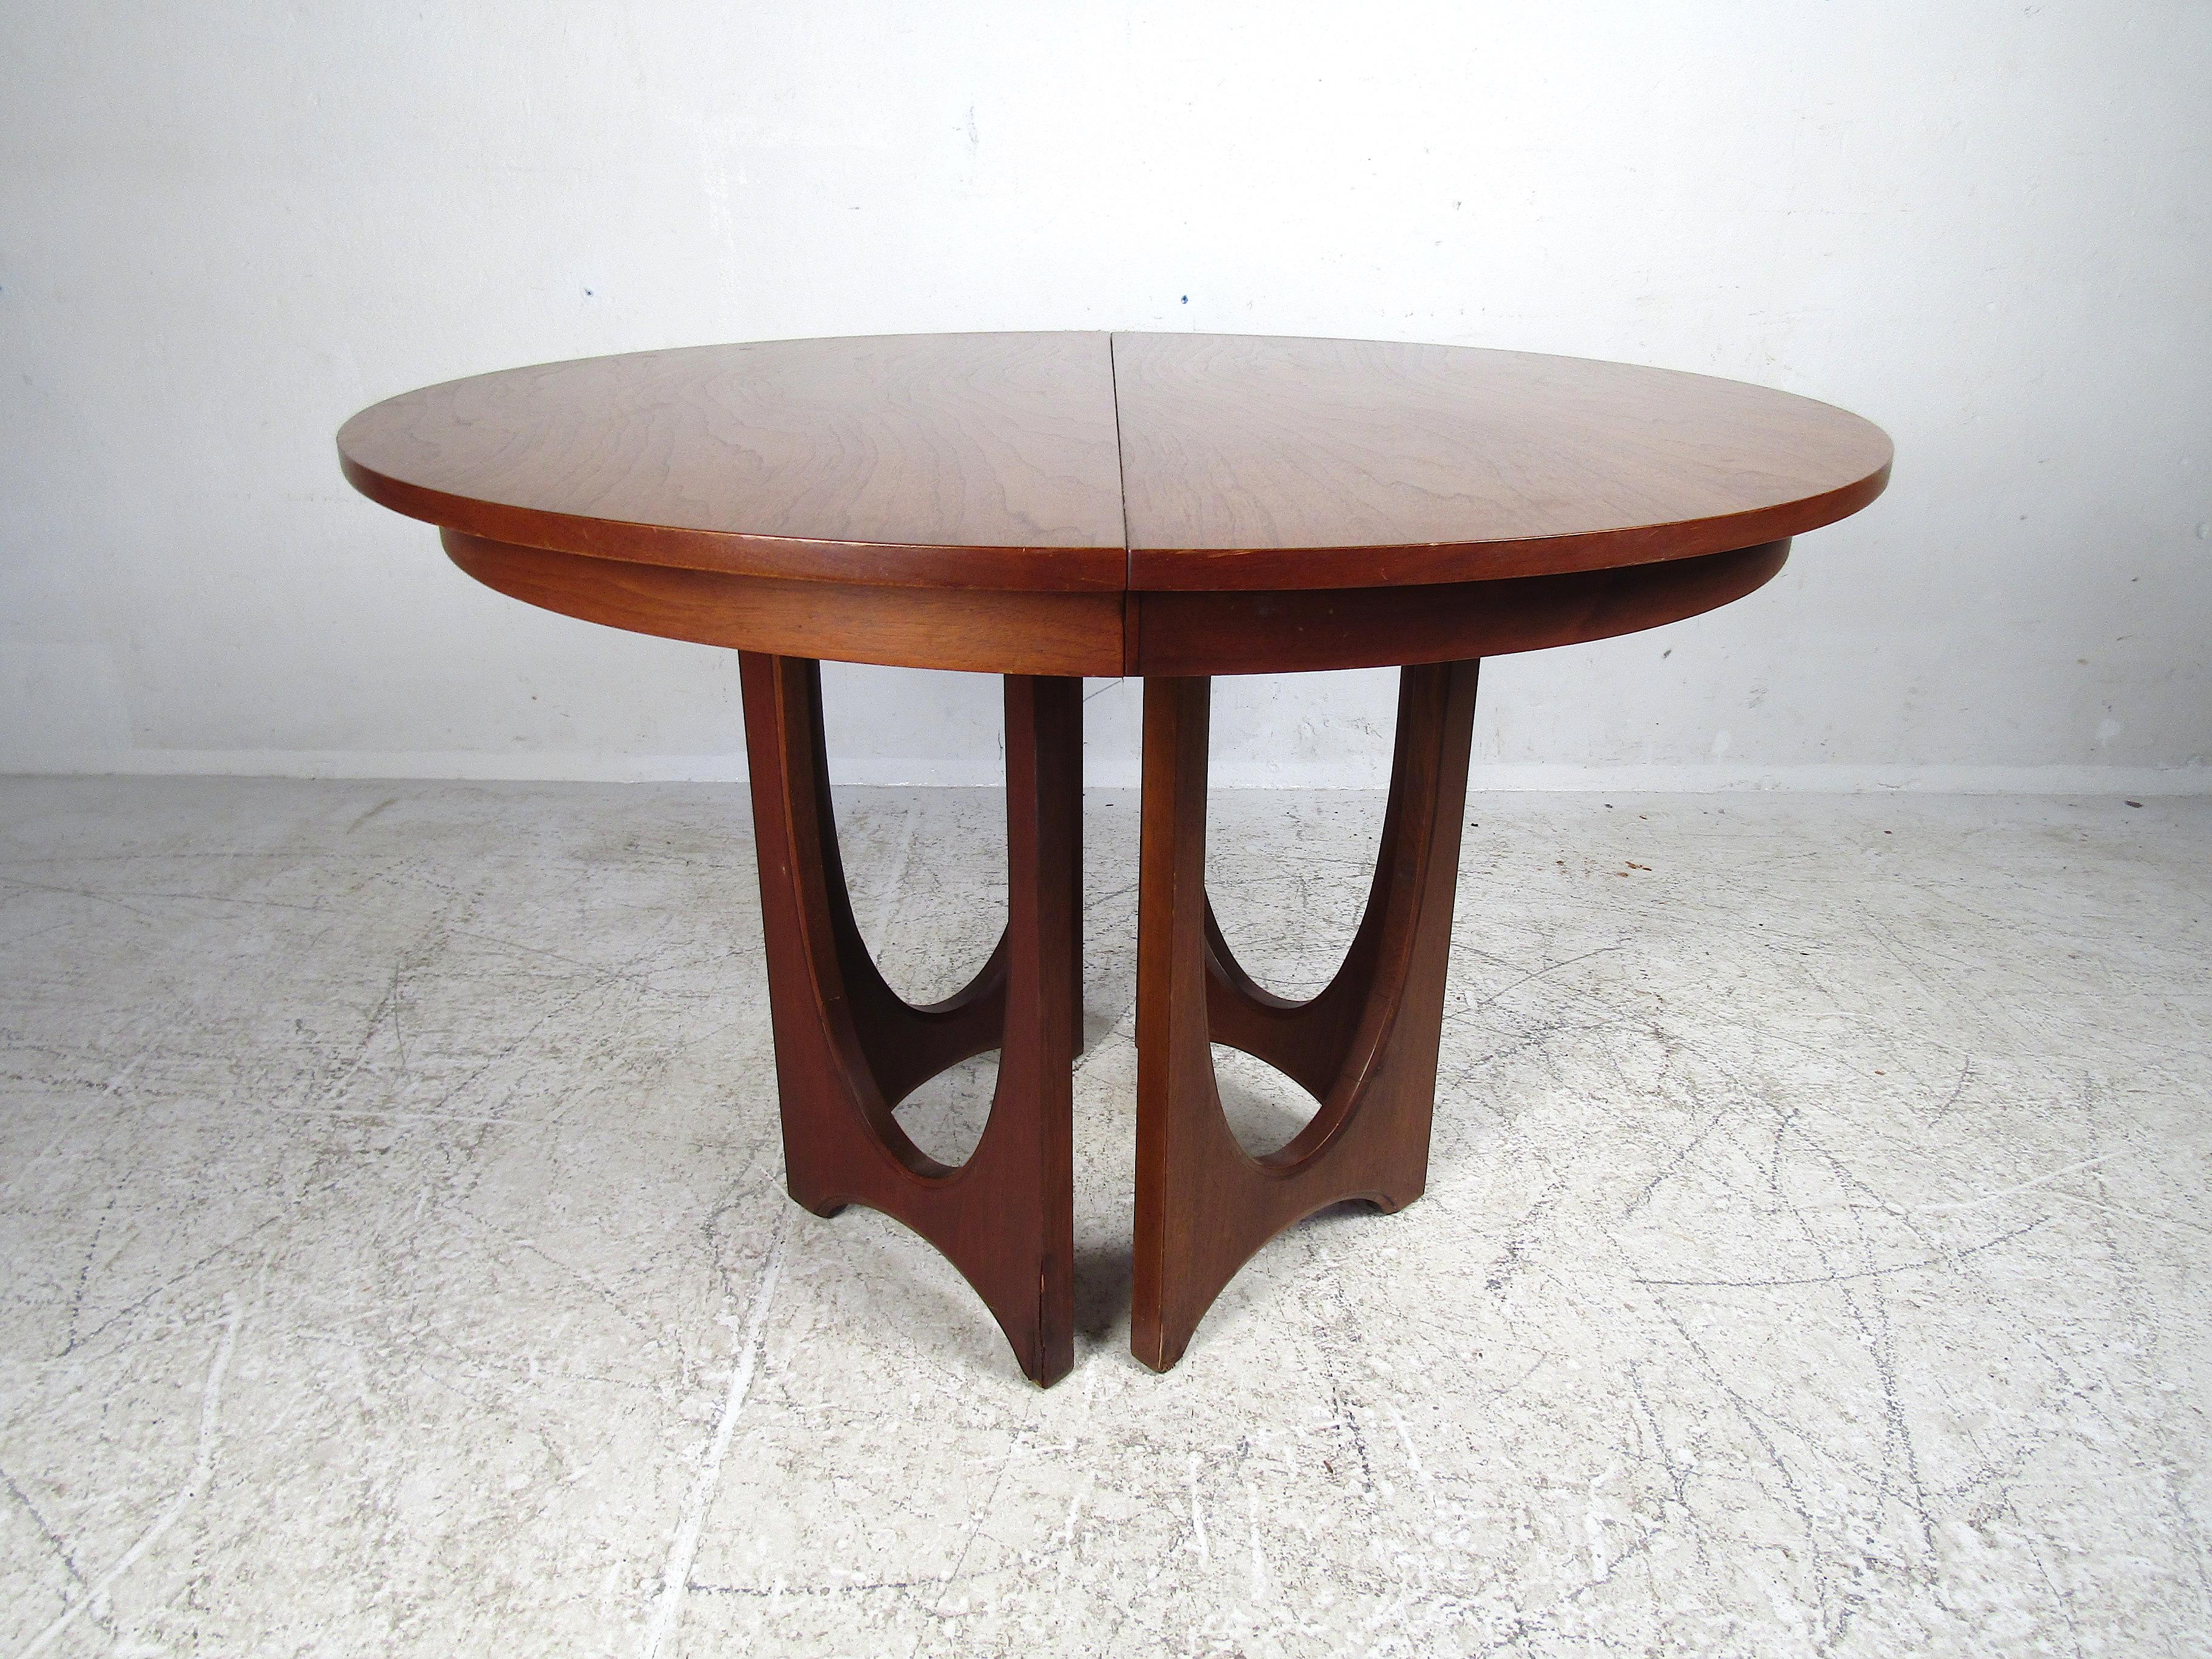 American Midcentury Dining Set by Broyhill